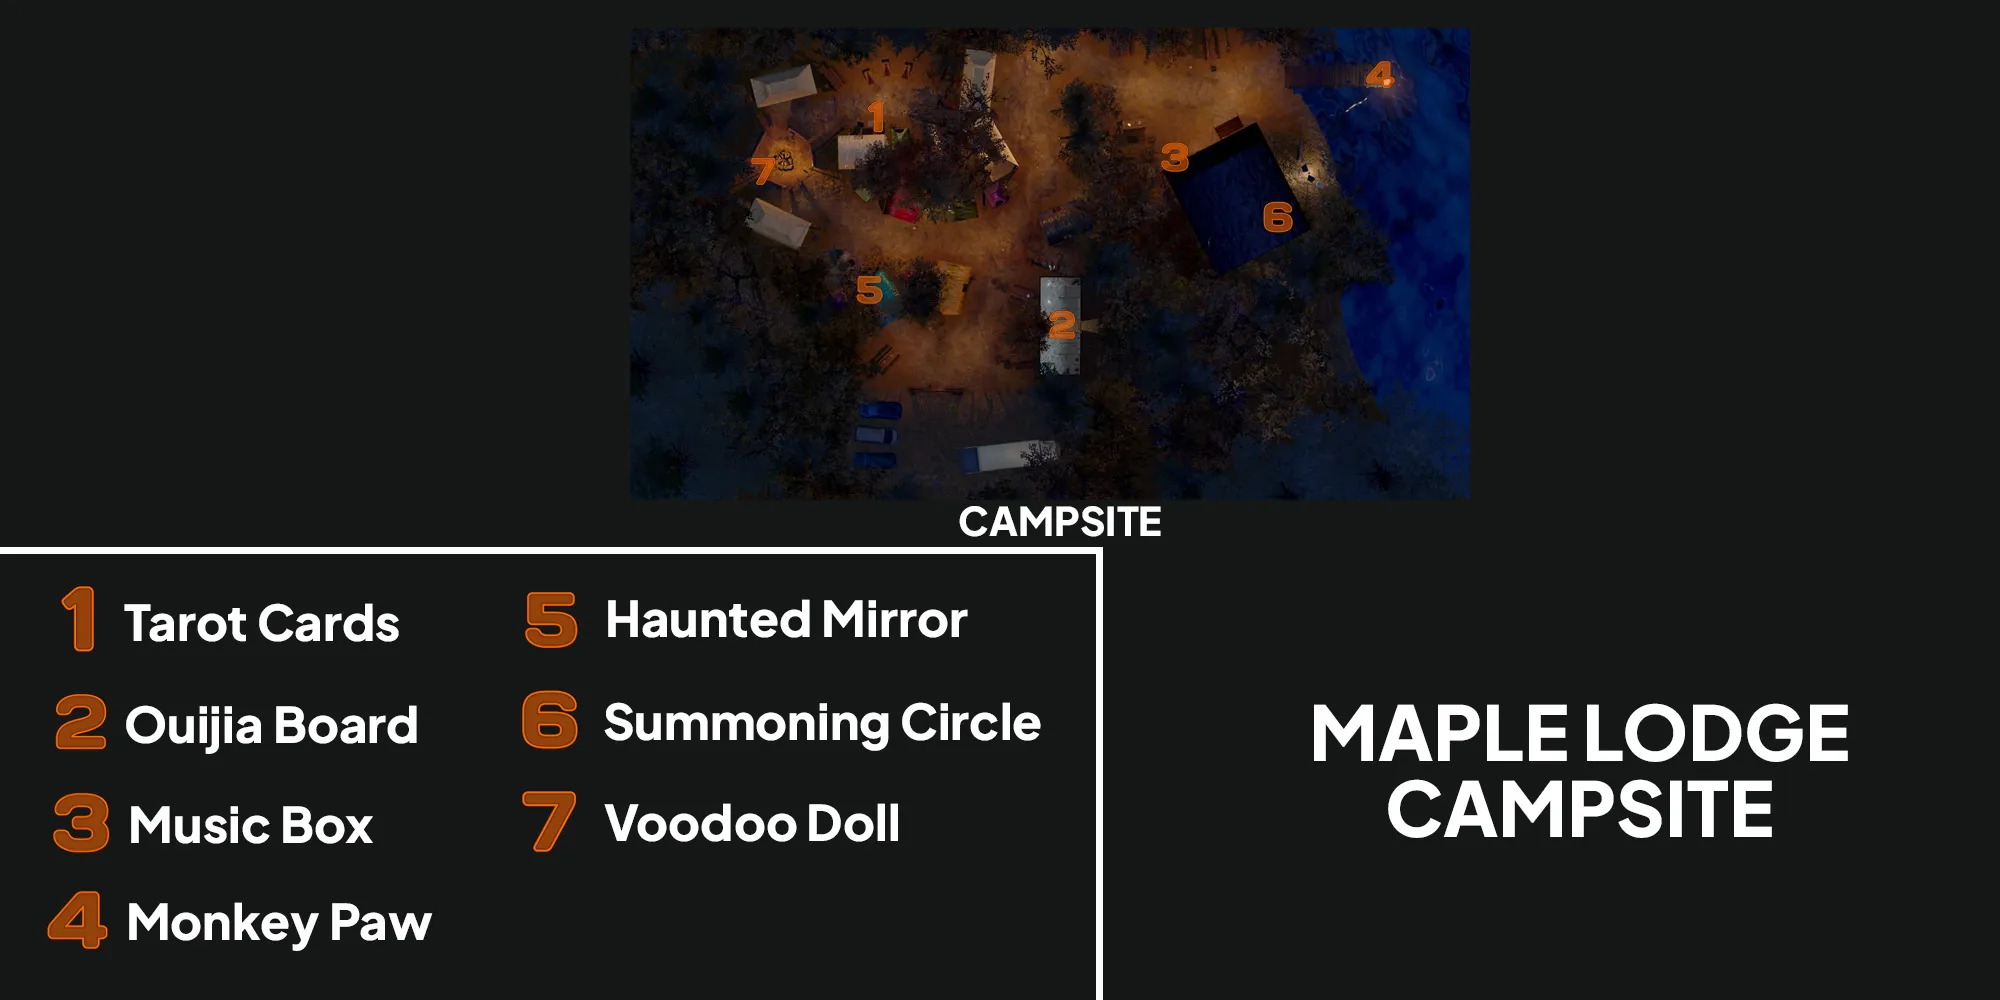 Image depicts a map of Maple Lodge Campsite in Phasmophobia with orange numbers showing the locations of the seven cursed objects.